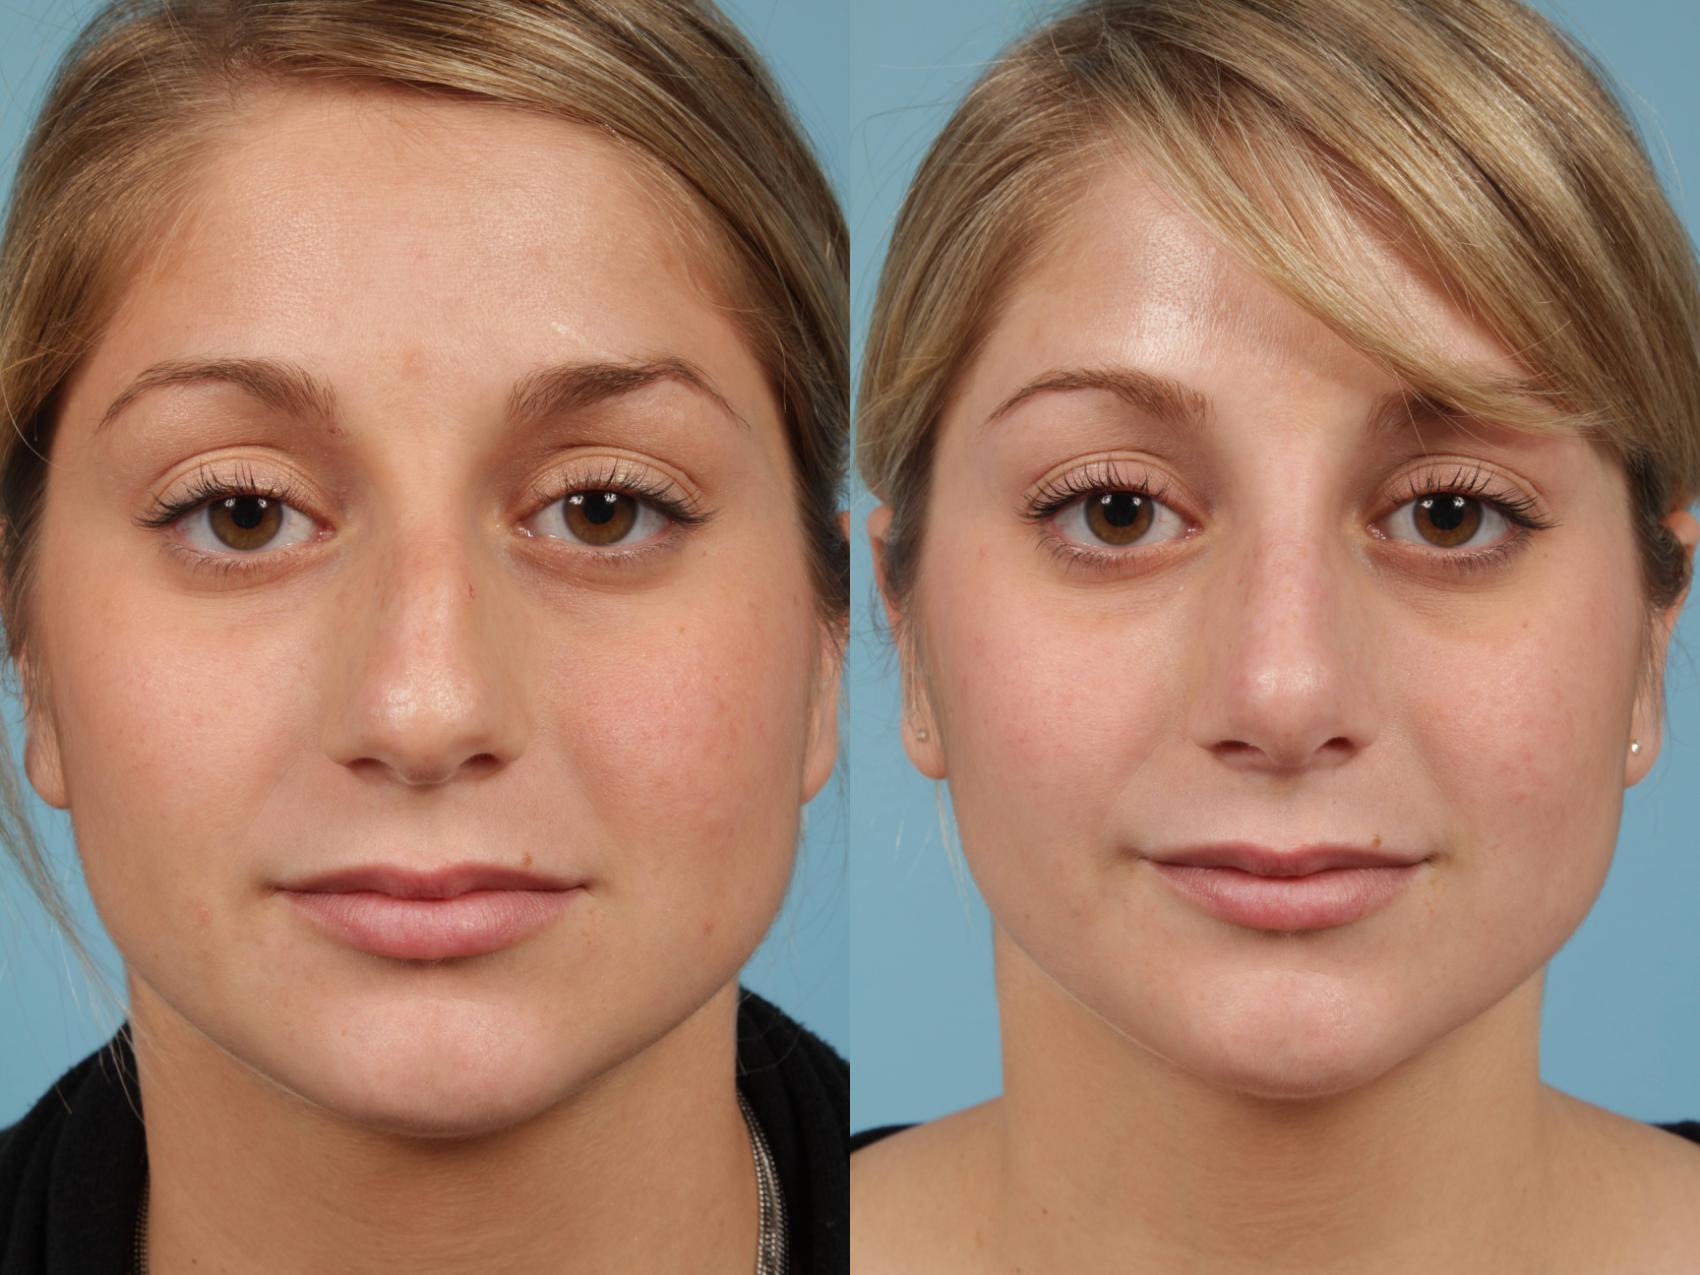 Rhinoplasty By Dr Mustoe Before And After Pictures Case 194 Chicago Il Tlkm Plastic Surgery 